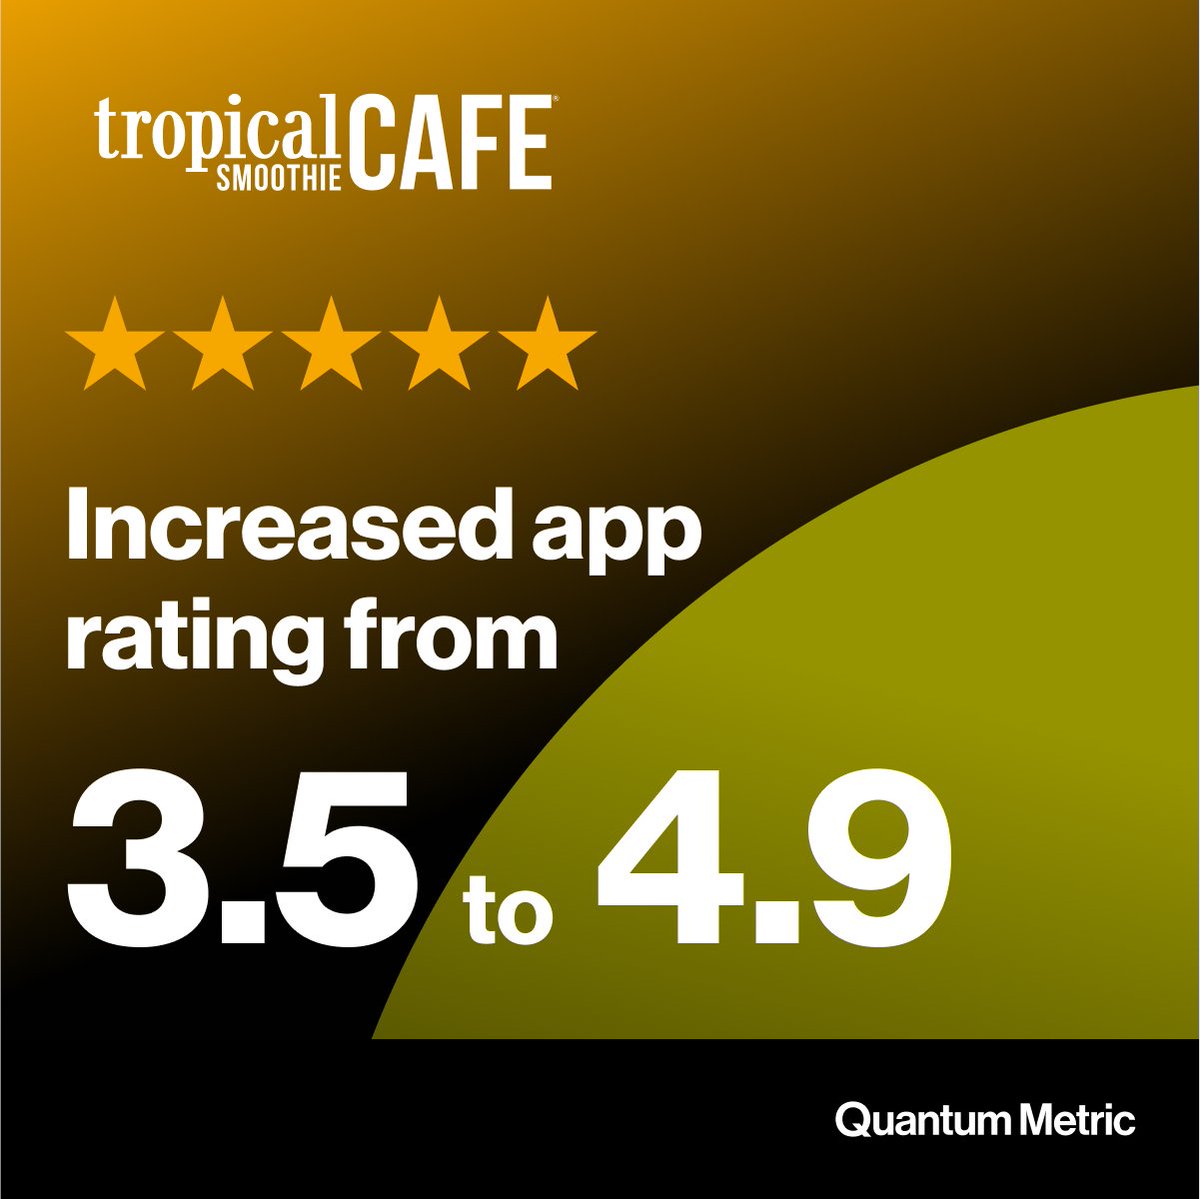 Transforming Customer Experience One Smoothie at a Time!🌴 Dive into how Tropical Smoothie Cafe used Quantum Metric to drive significant growth in mobile app usage. Read the full story here: hubs.ly/Q02sJxcn0